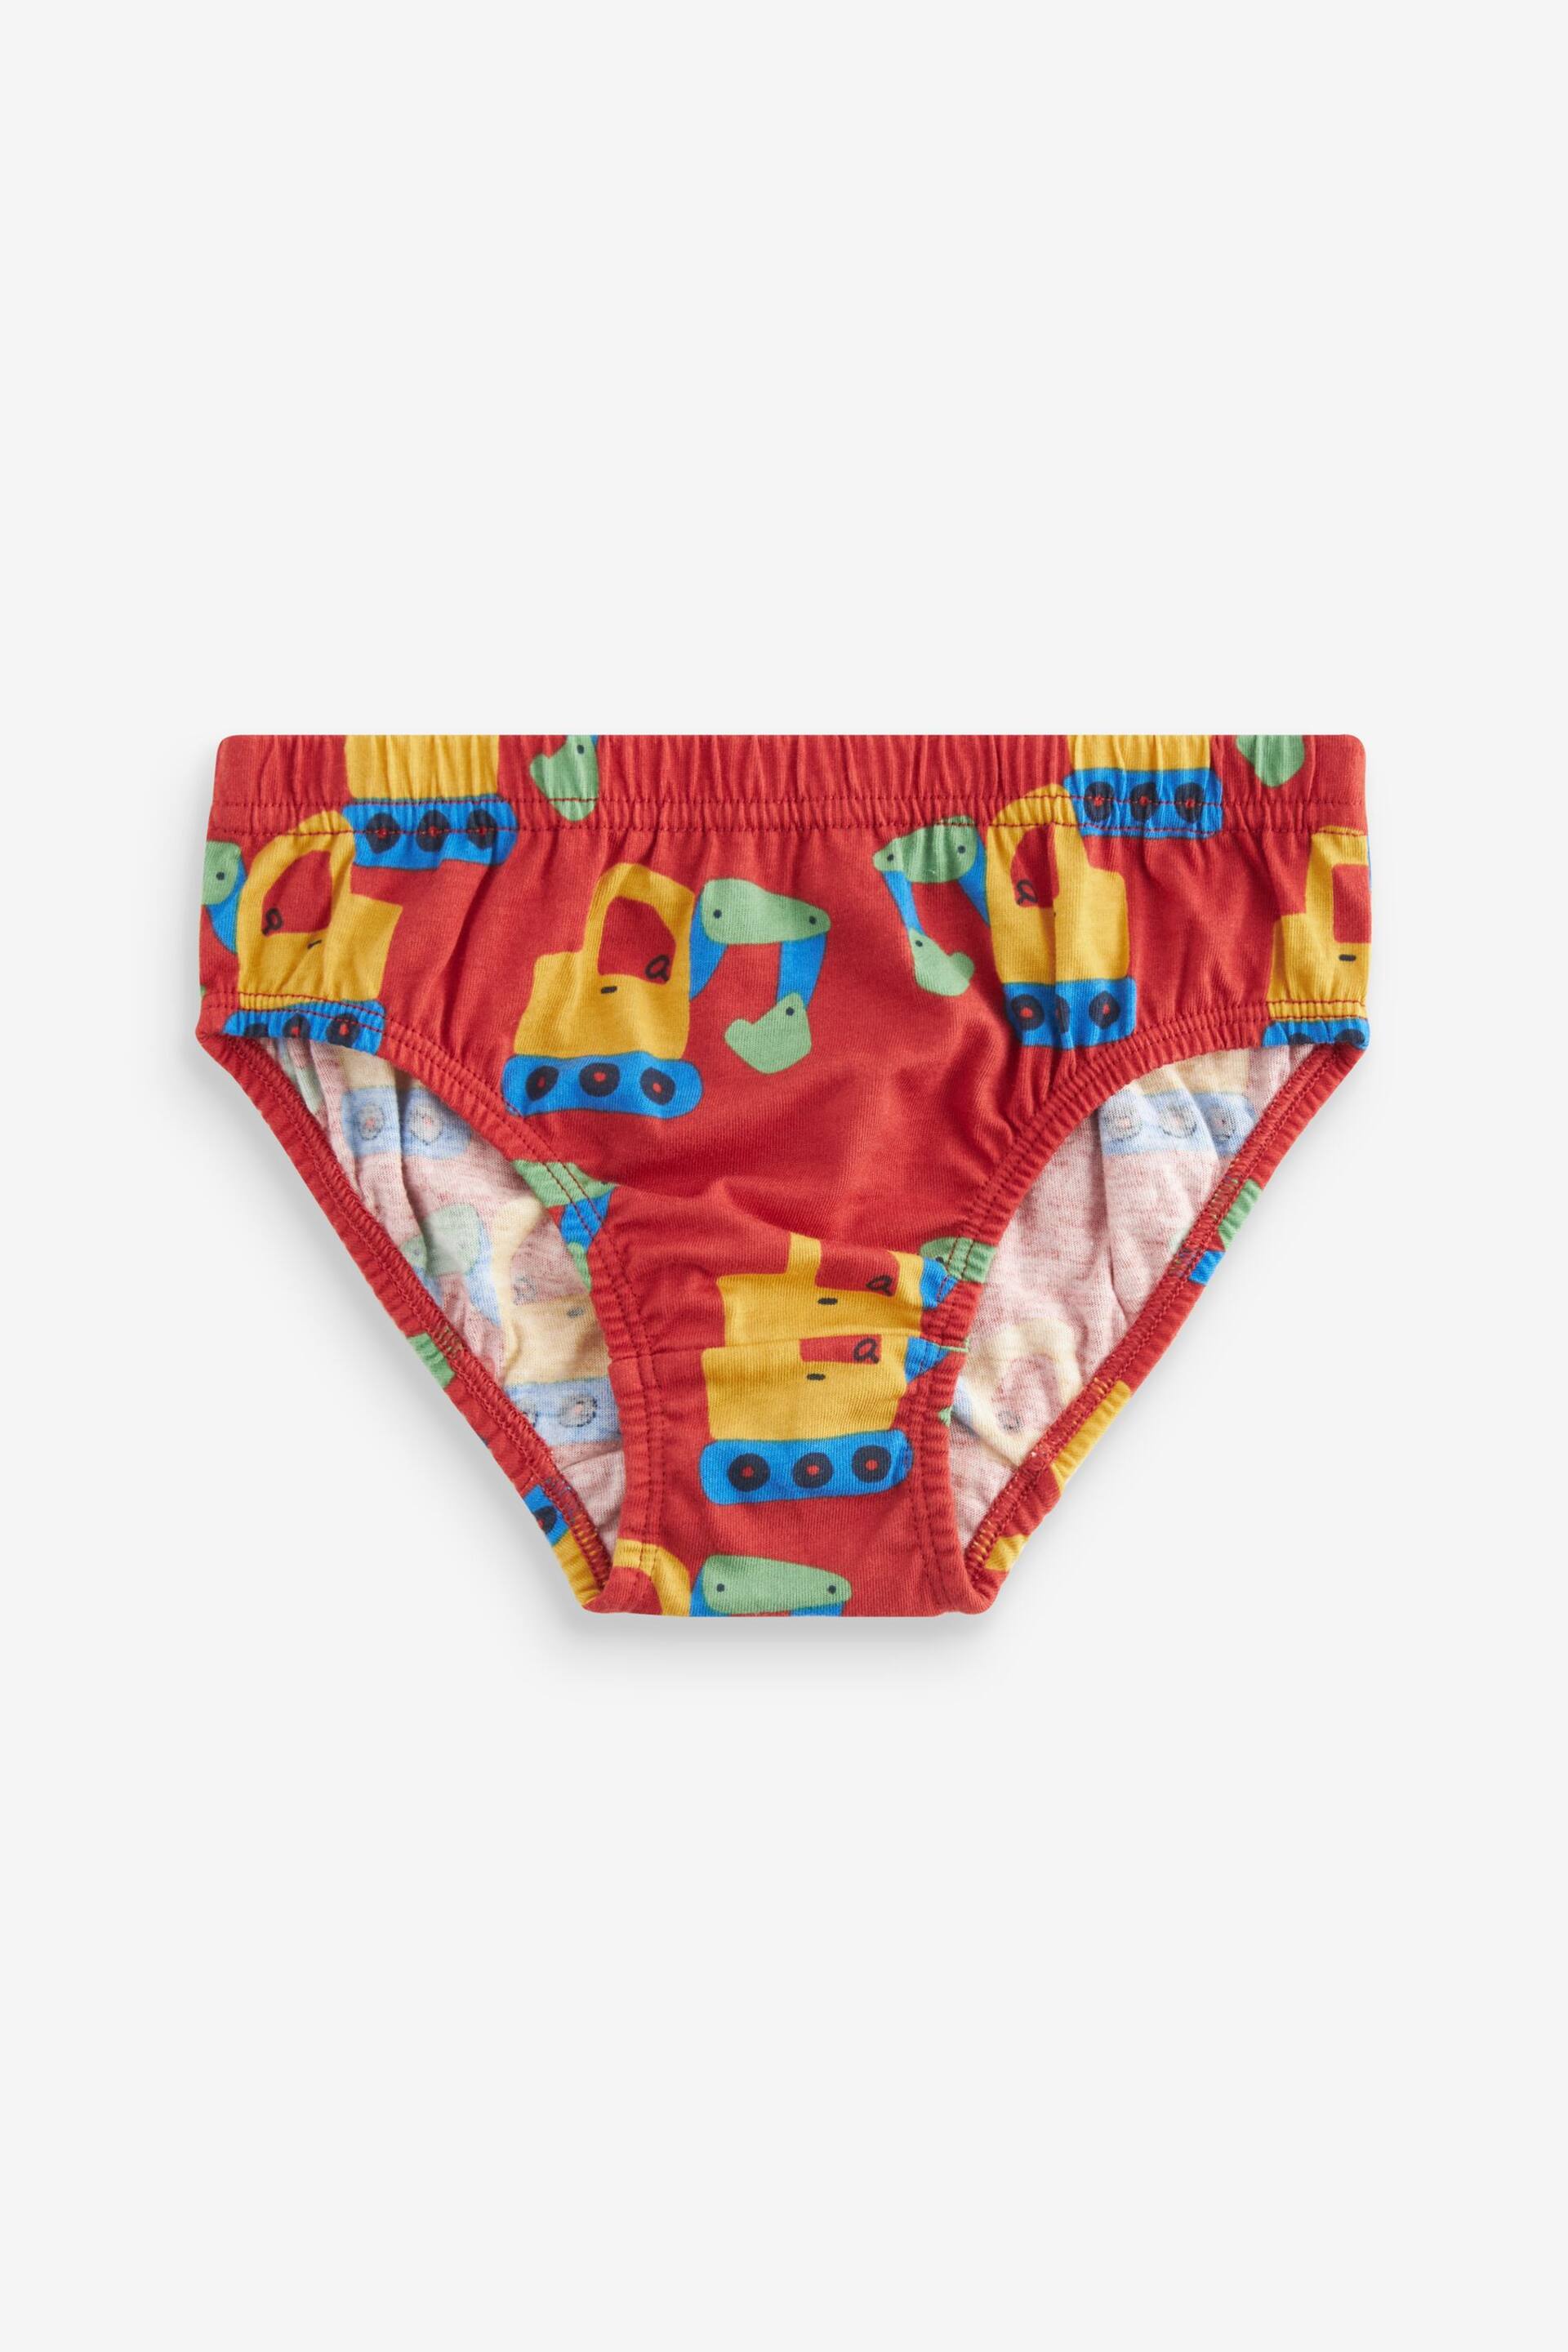 Bright Primary Print Briefs 5 Pack (1.5-10yrs) - Image 3 of 8